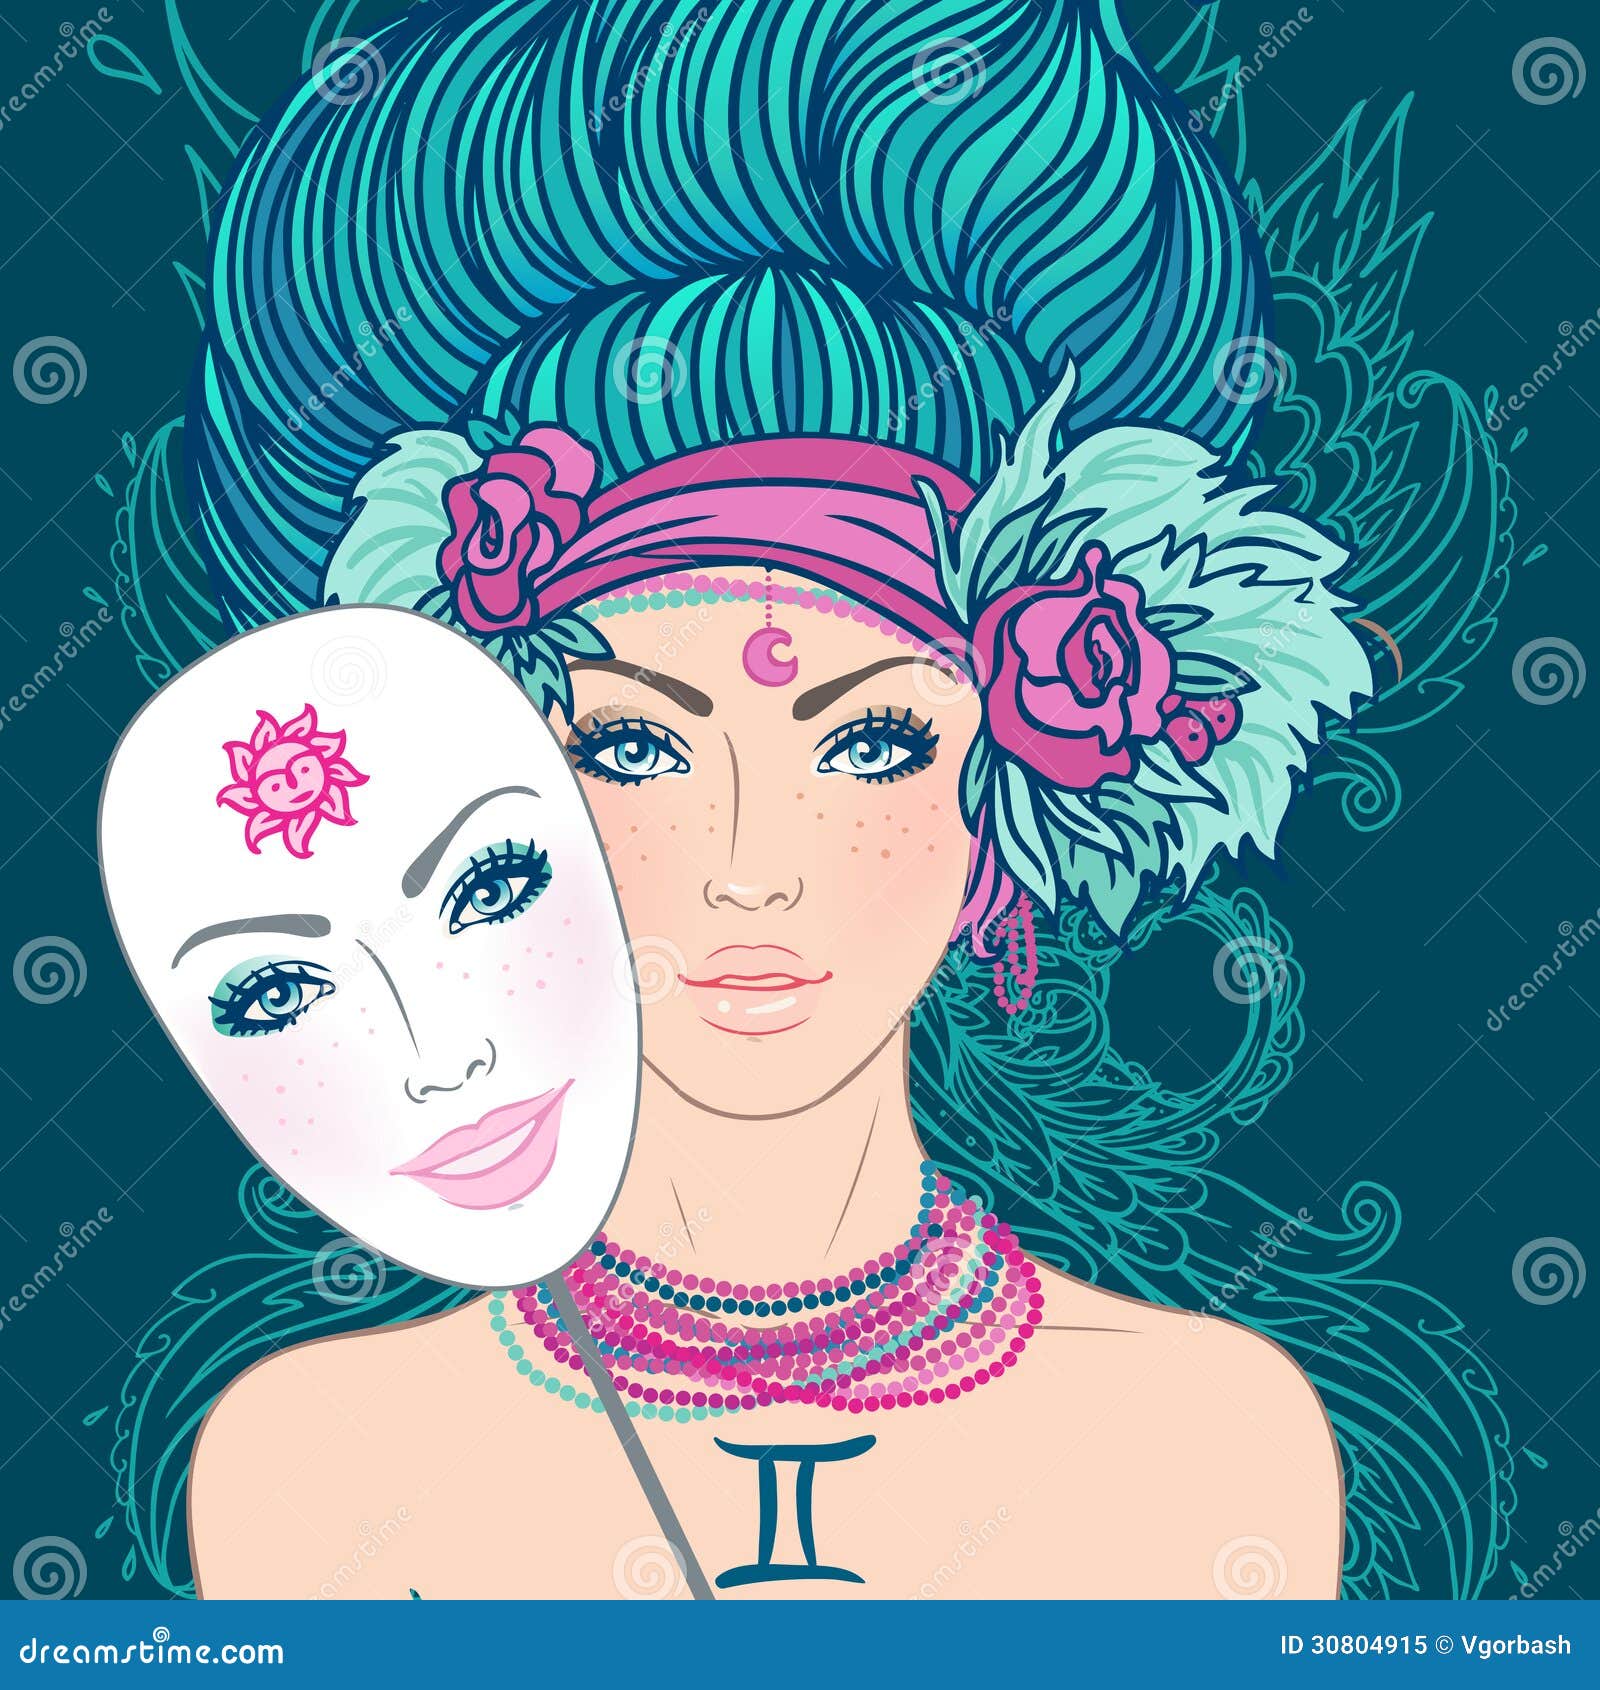 Download Illustration Of Gemini Zodiac Sign As A Beautiful Girl Stock Illustration - Illustration of ...